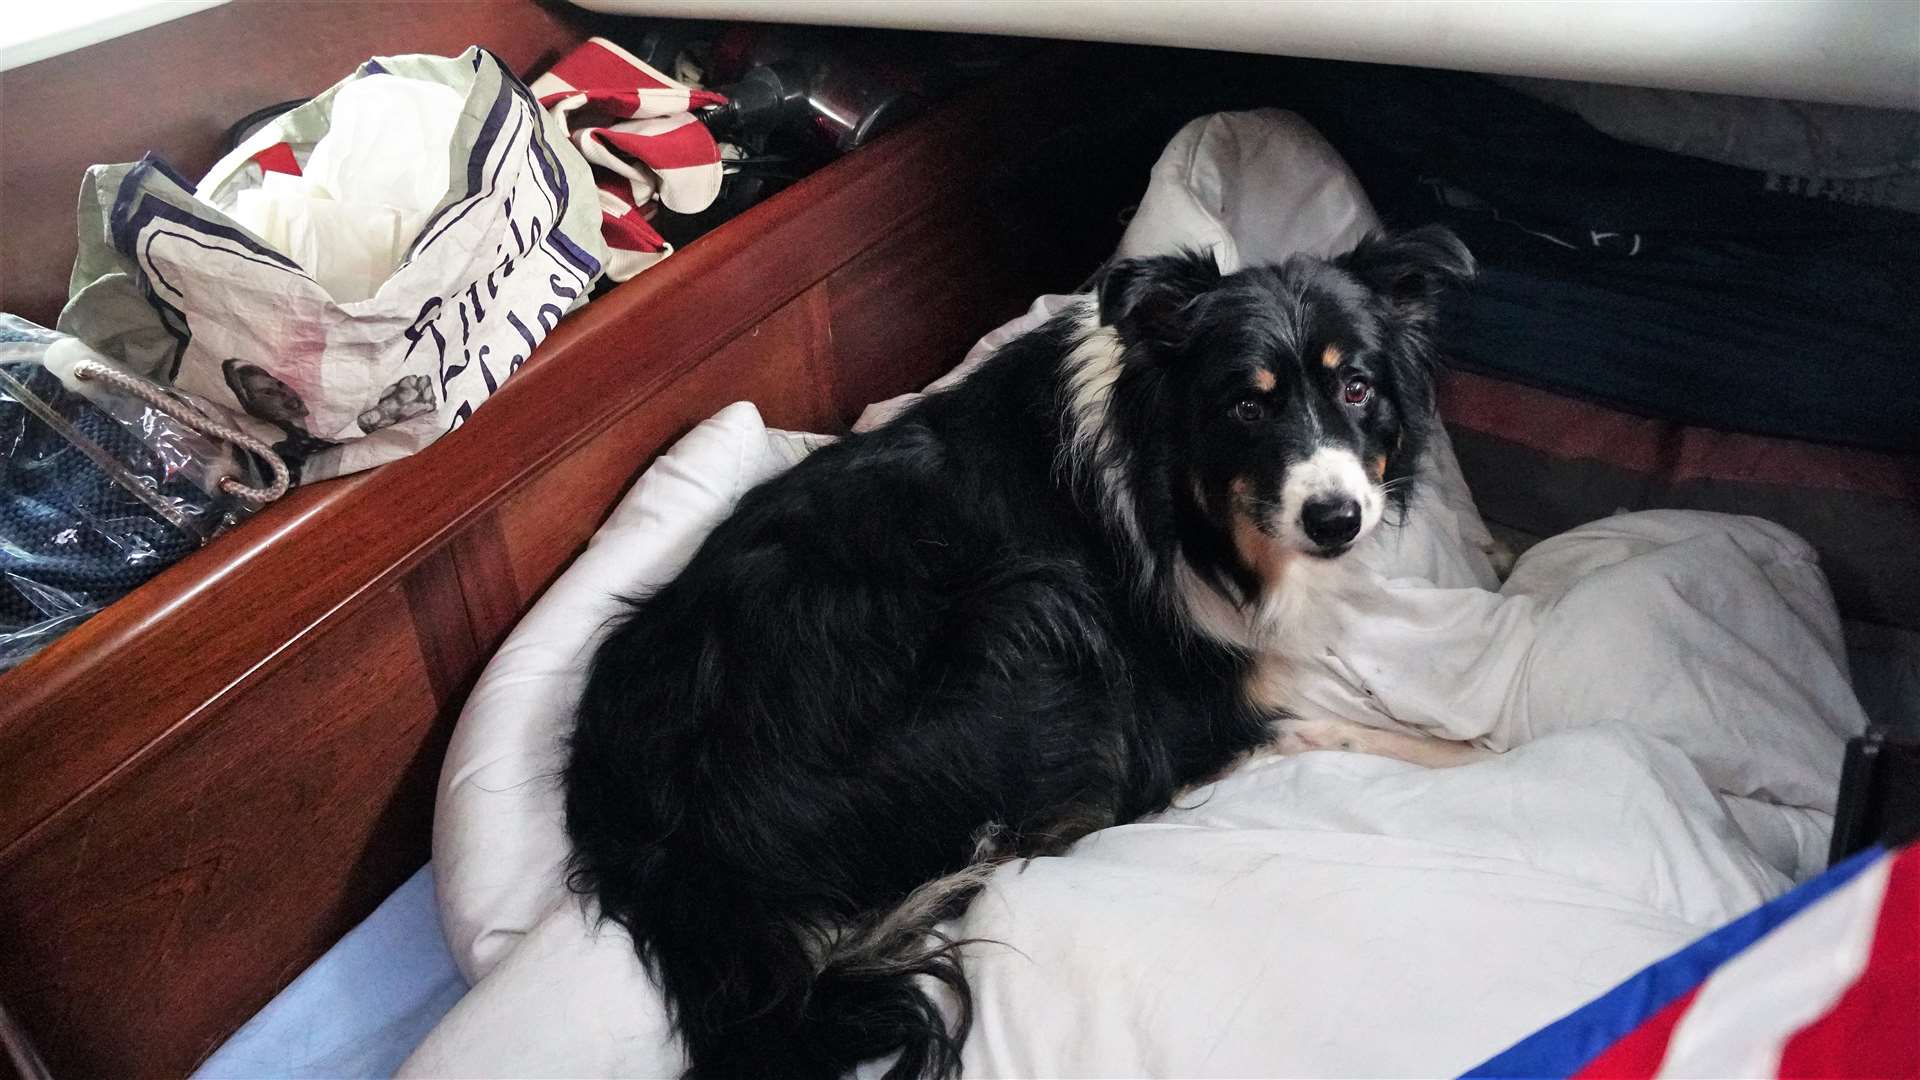 George's faithful companion Buster the dog has his own bed on board the boat. Picture: DGS